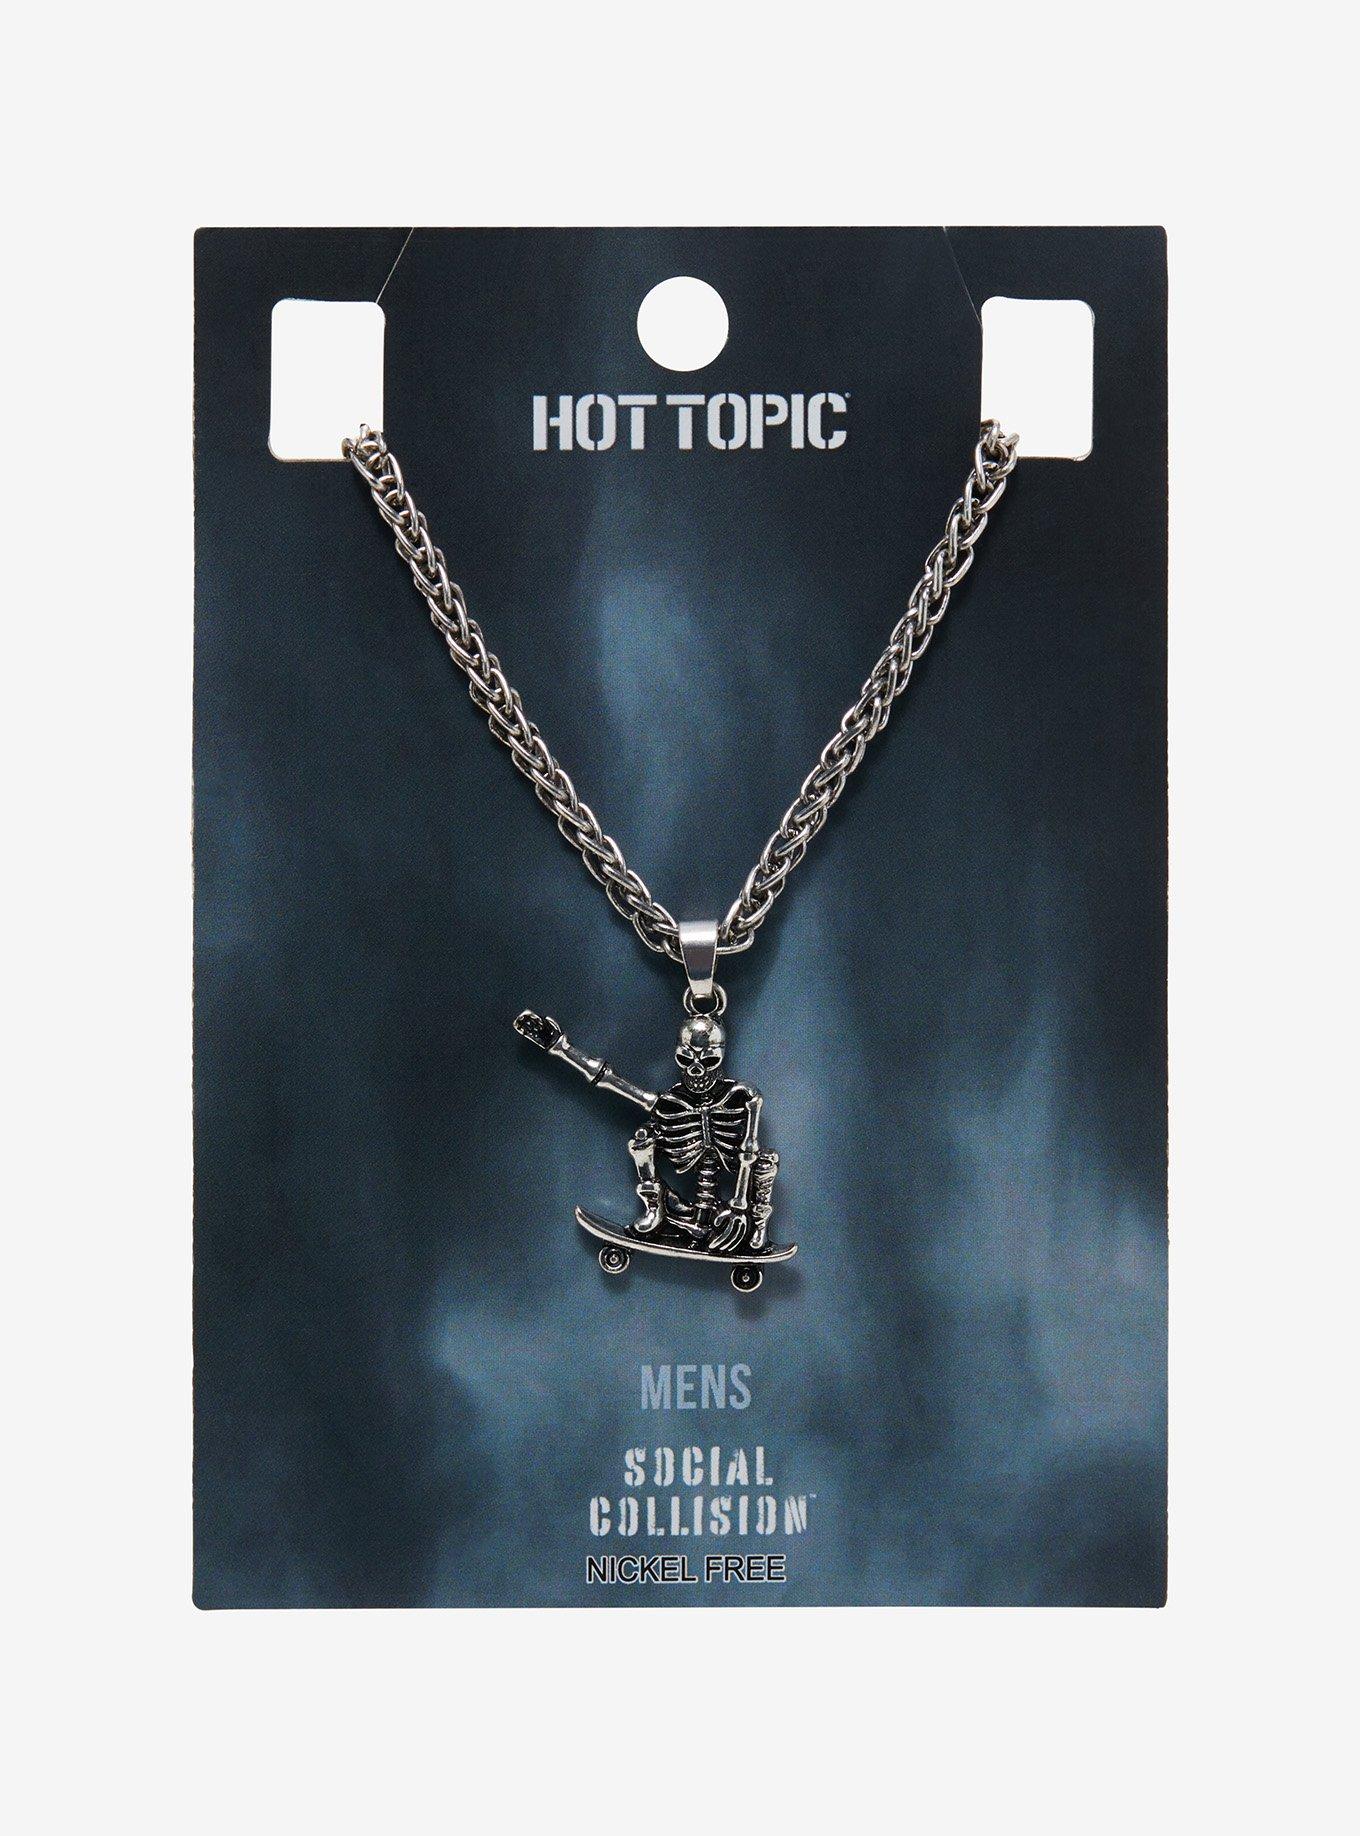 Hood By Air Lock Chain Necklace in Metallic for Men